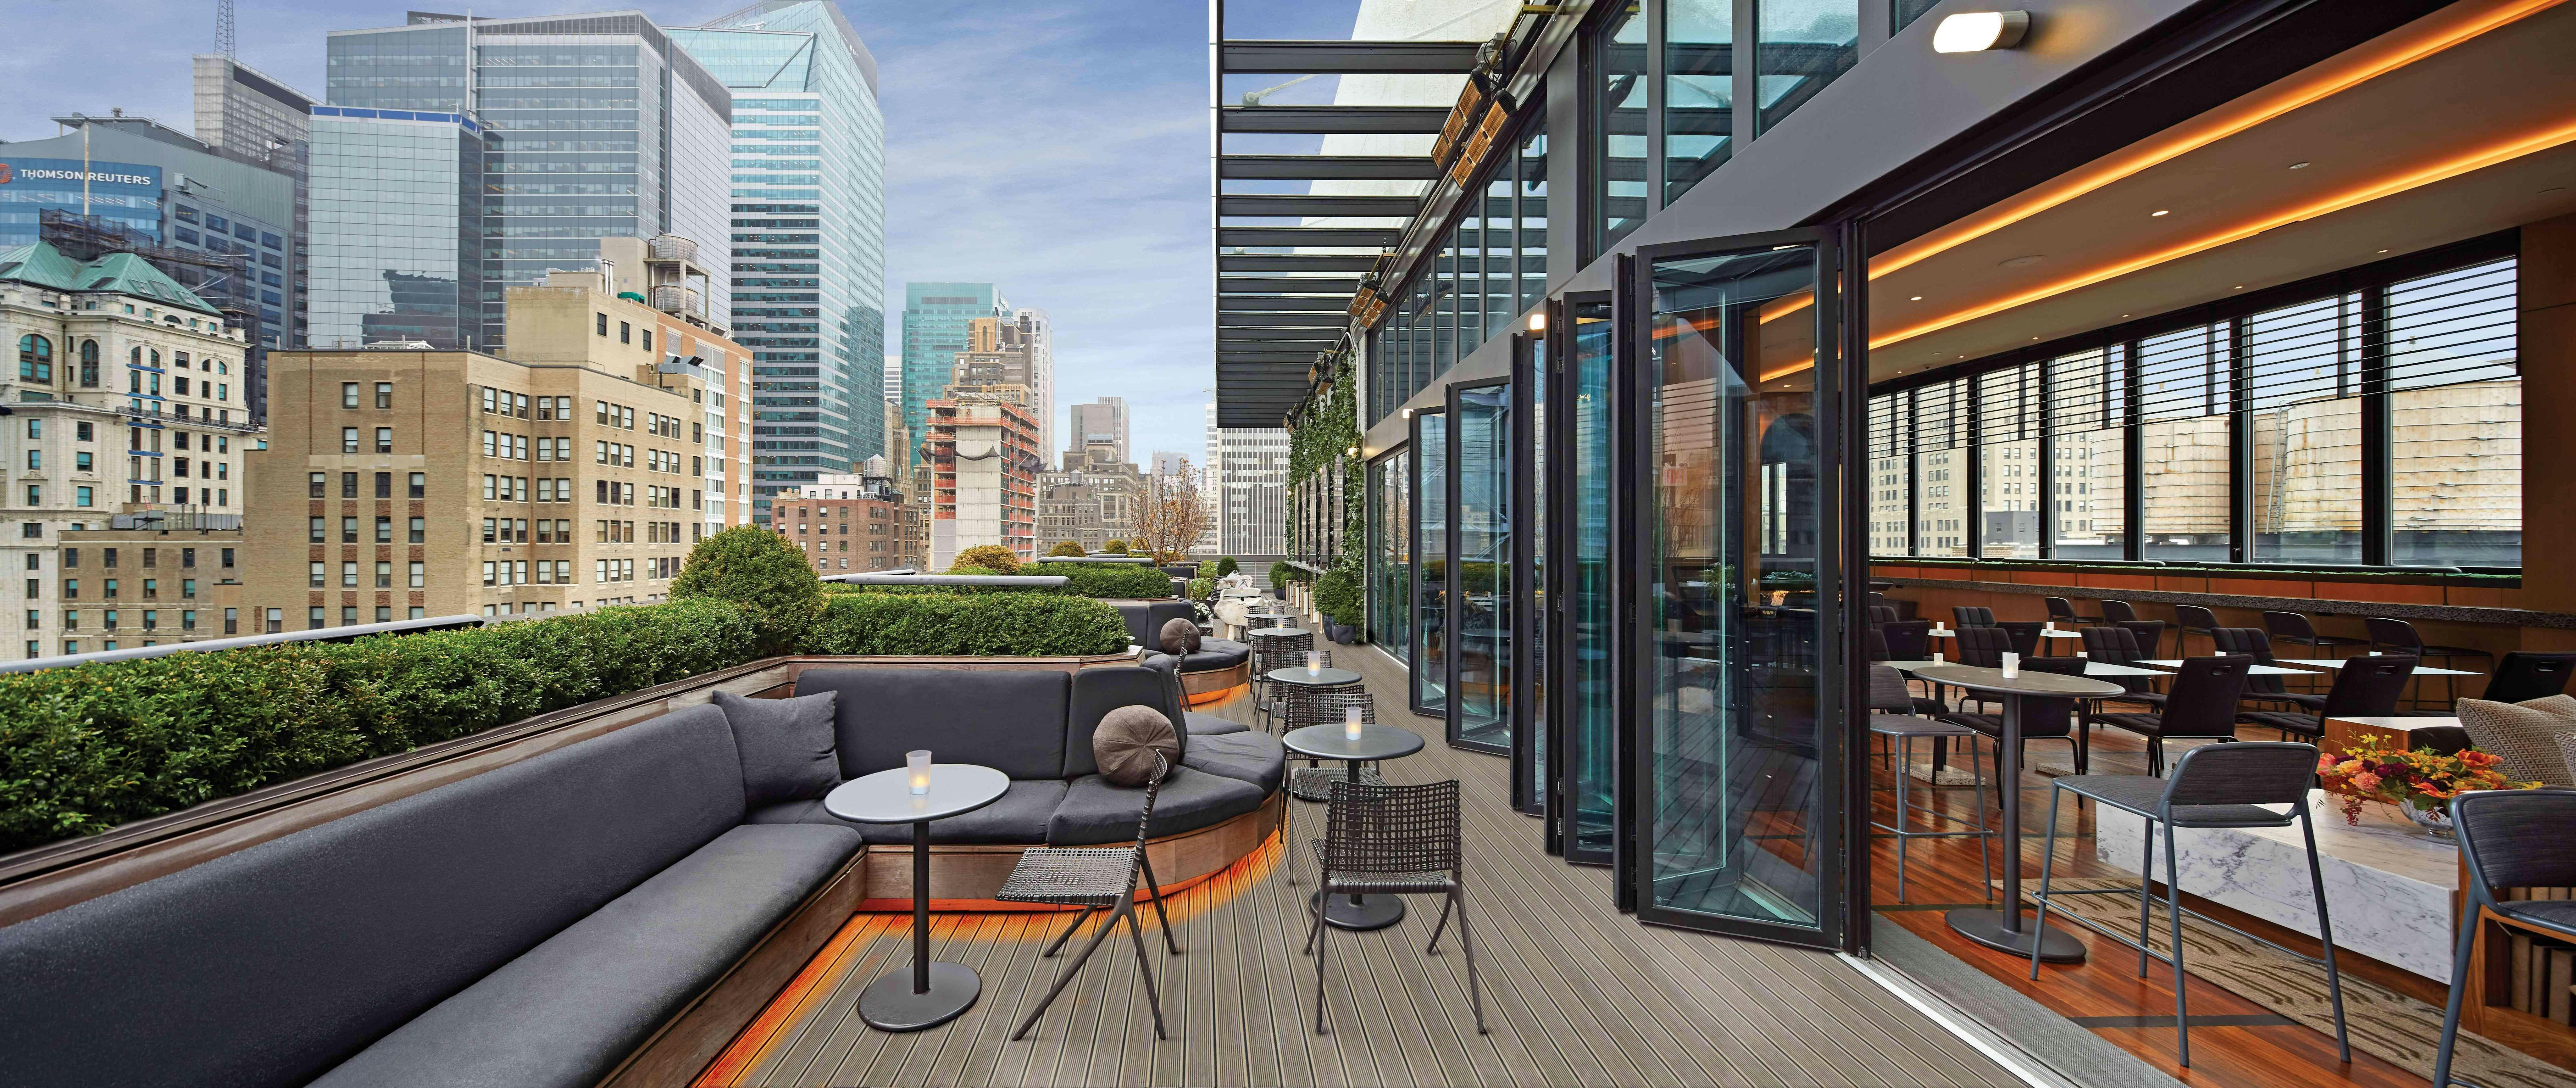 folding-glass-walls-on-rooftop-in-nyc